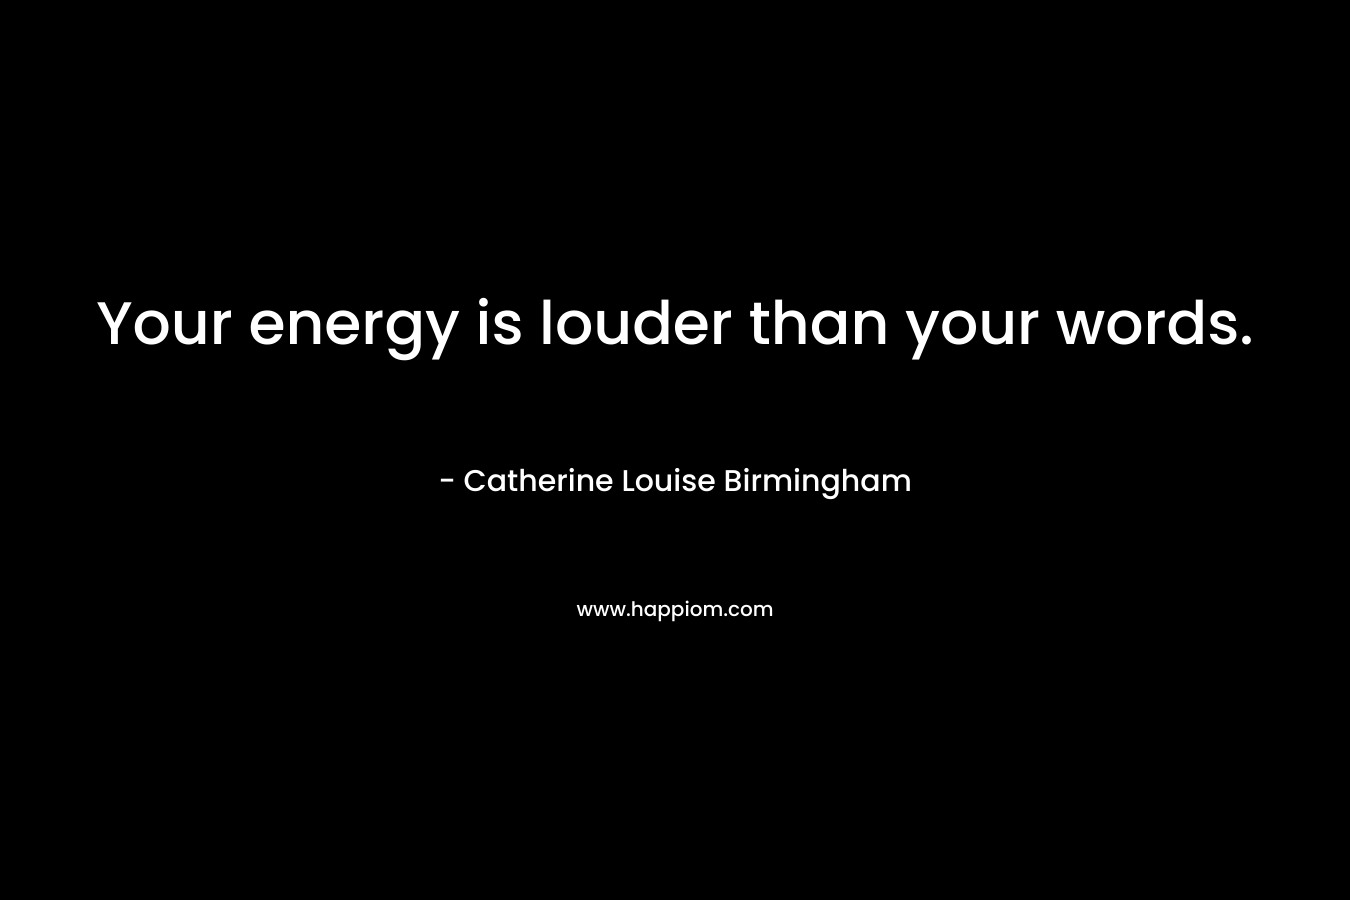 Your energy is louder than your words.